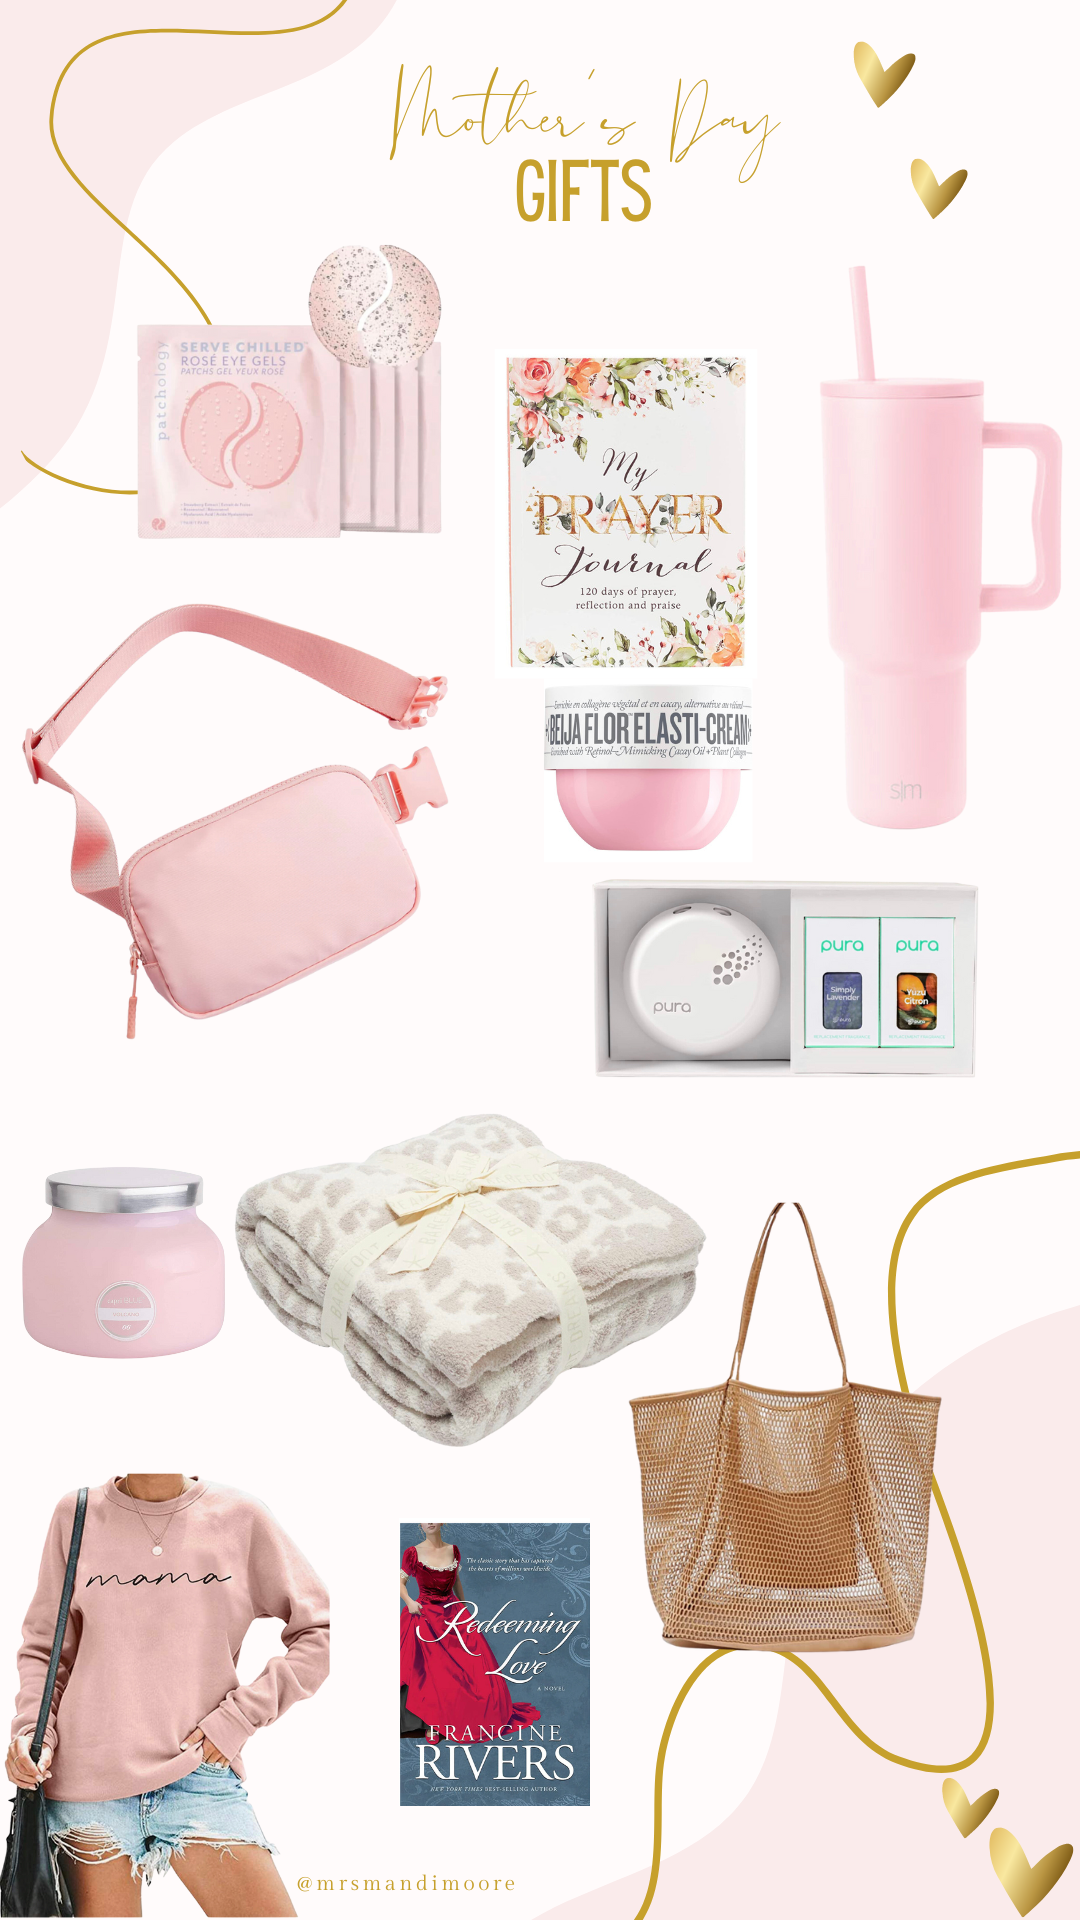 Top 12 Mother's Day Gift Ideas – Idea Land